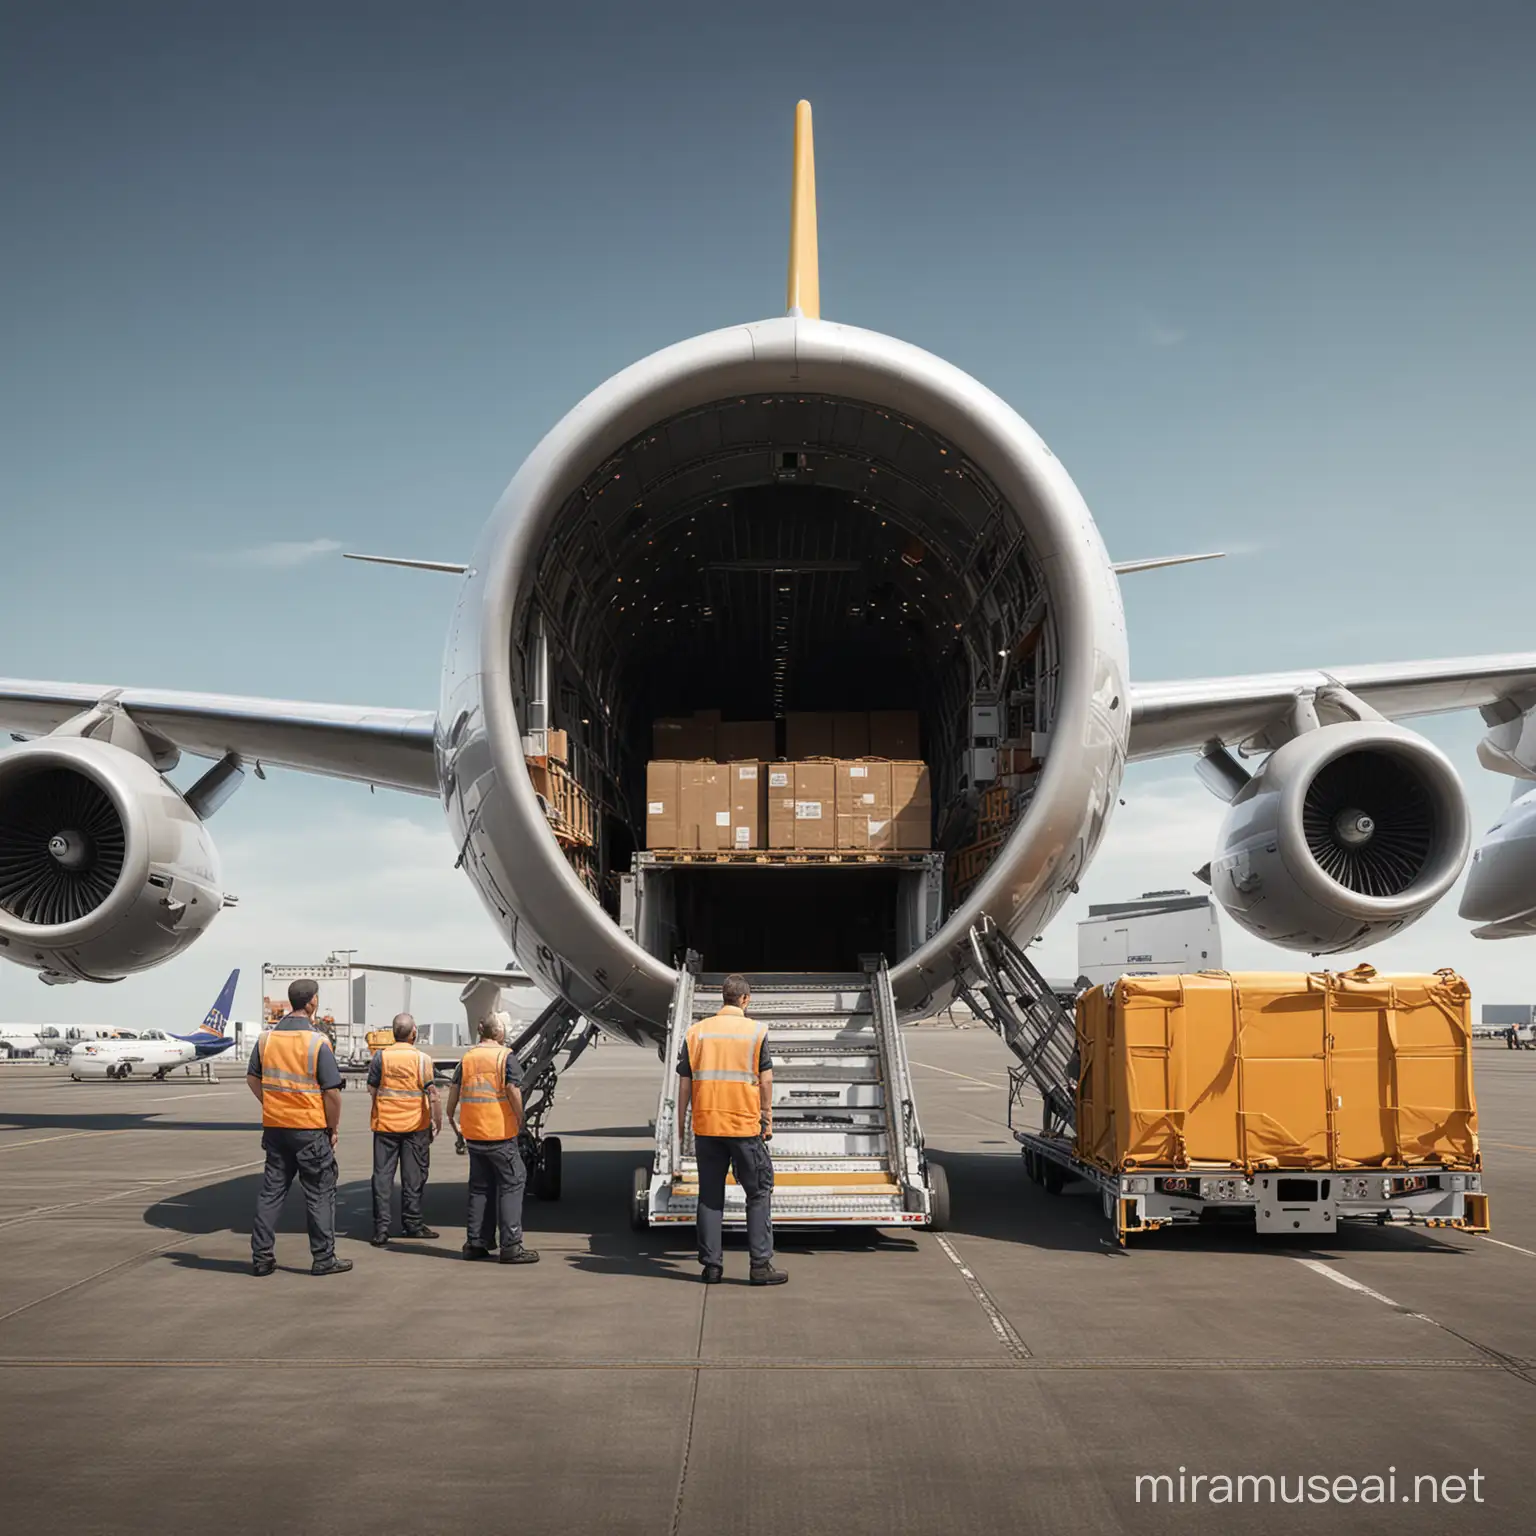 a realistic side view image of an airplane with wide open cargo door at the front of the plane, cargo boxes being loaded, and ground crew members wearing safety vests